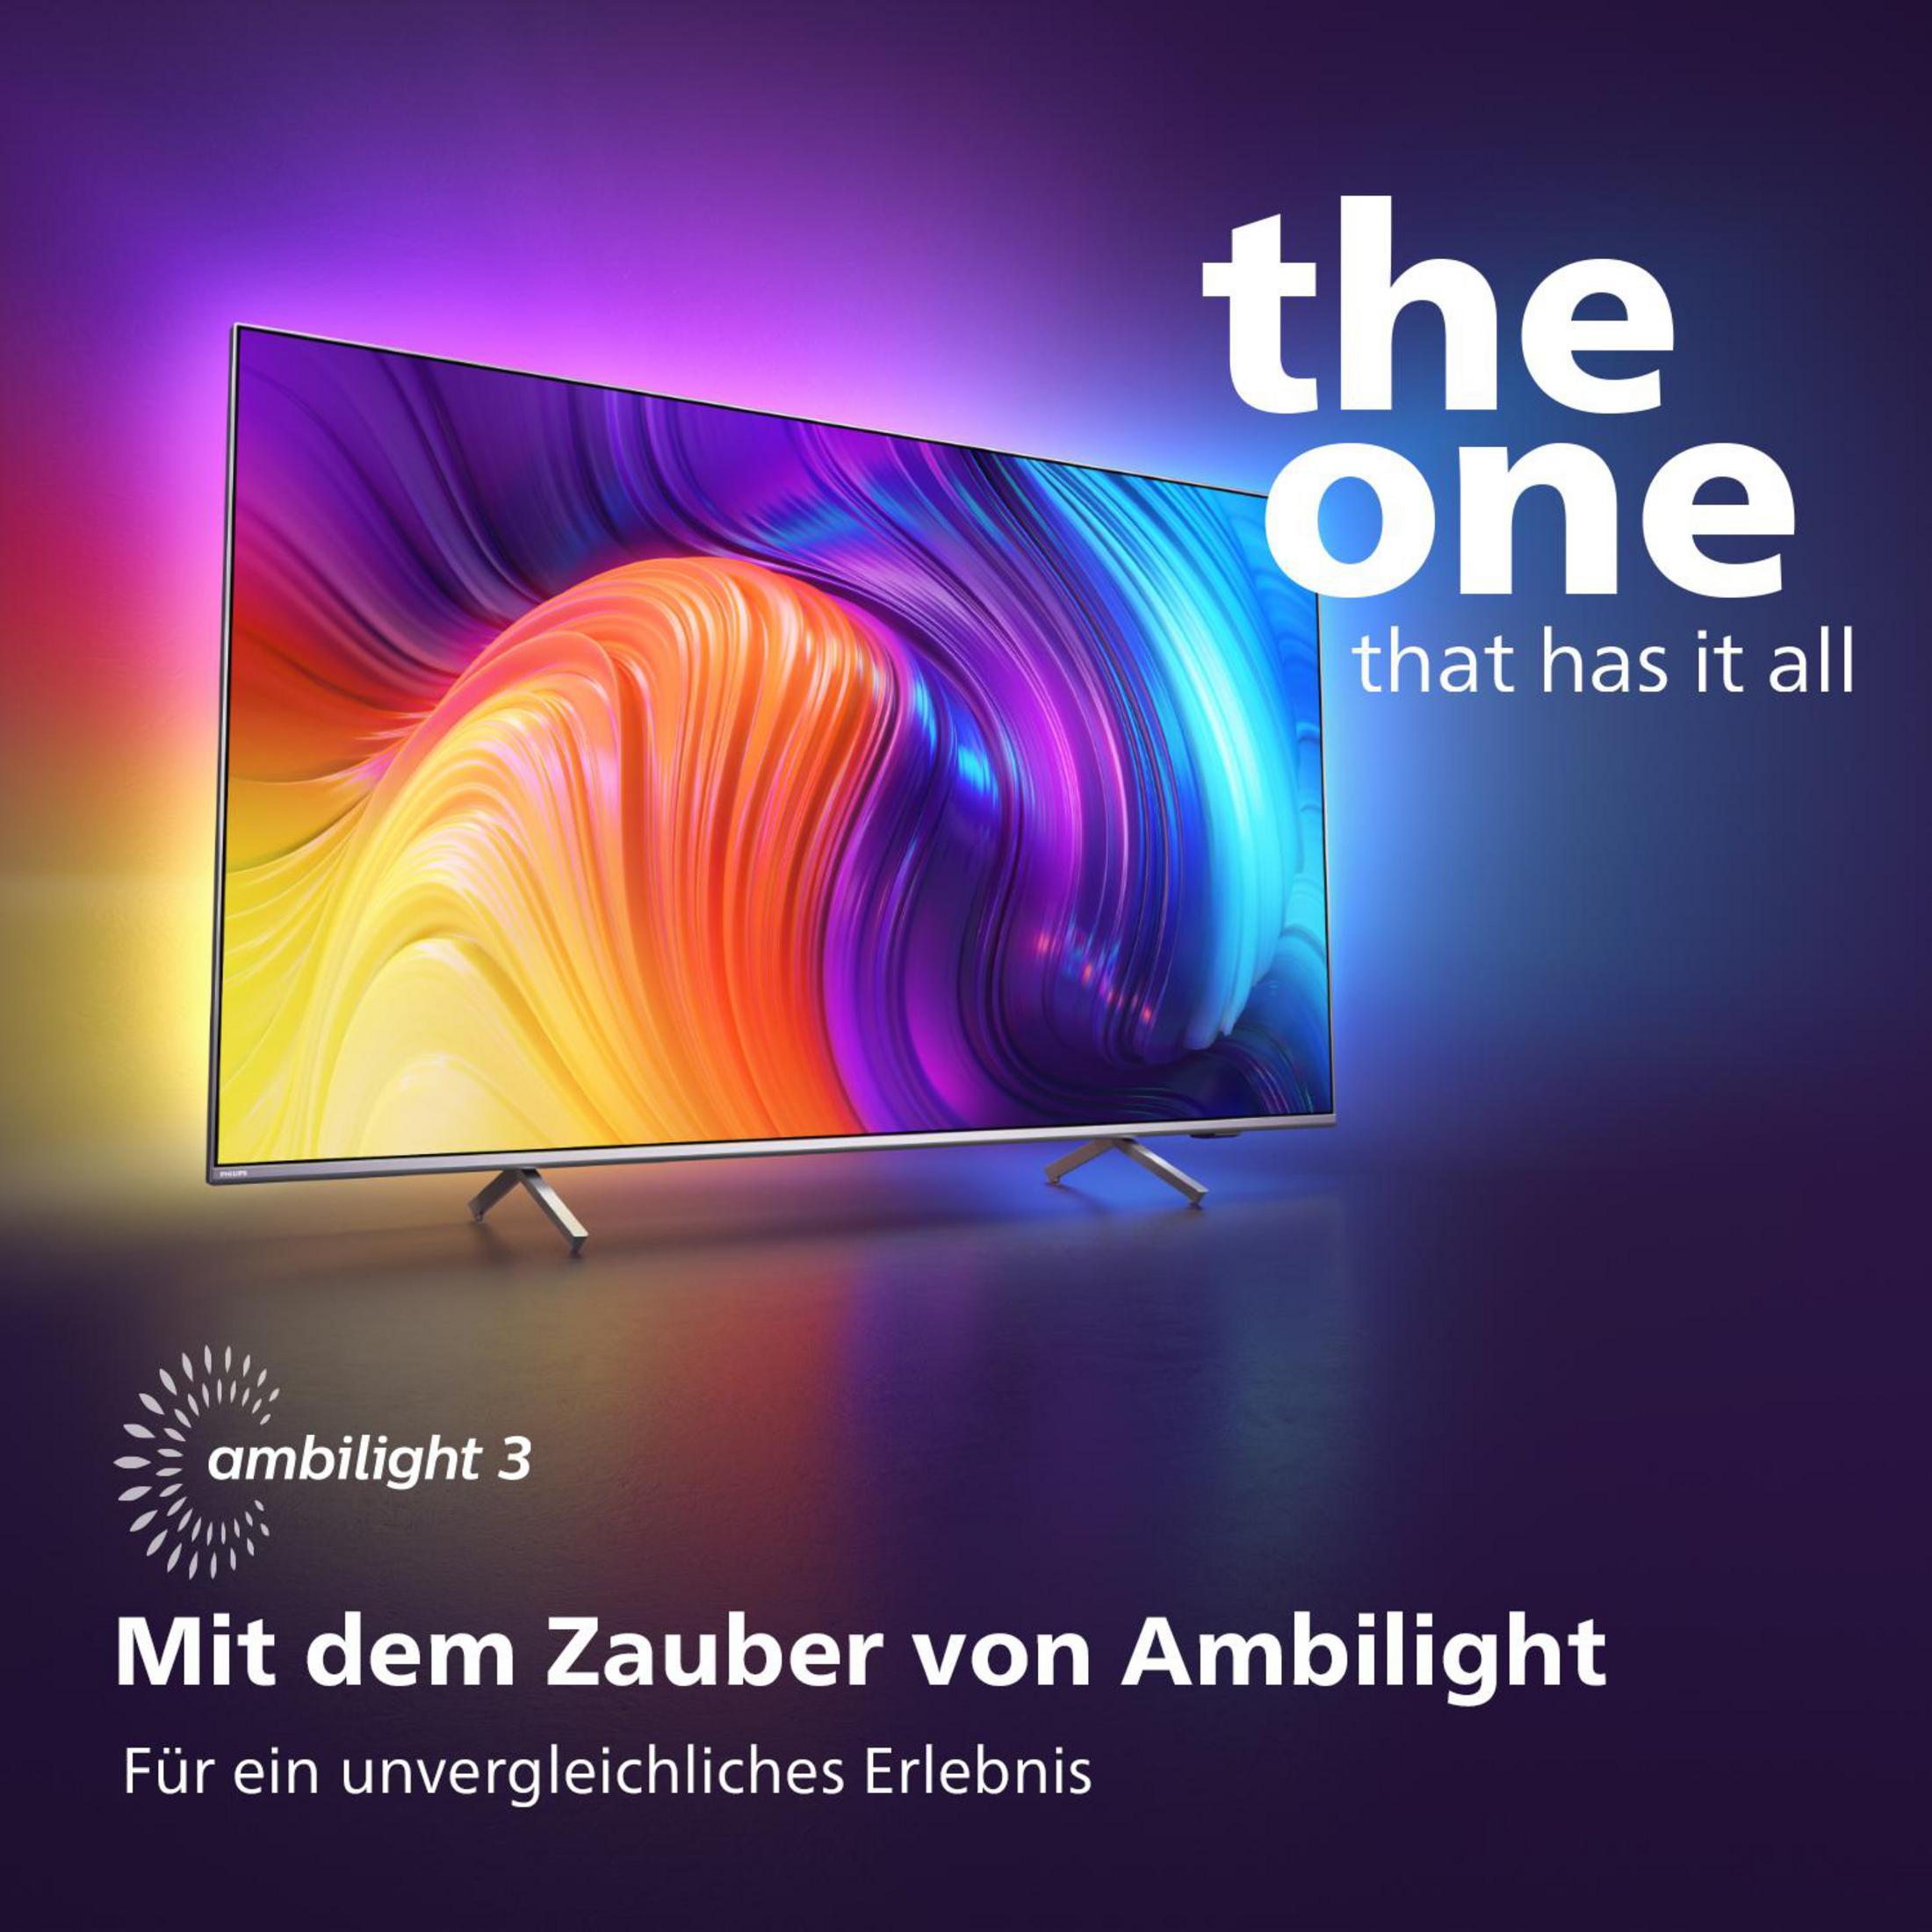 Zoll 4K, 43 TV PHILIPS 43 8507/12 Android Ambilight, PUS 109,22 / (Flat, 11 (R)) LED UHD cm, TV™